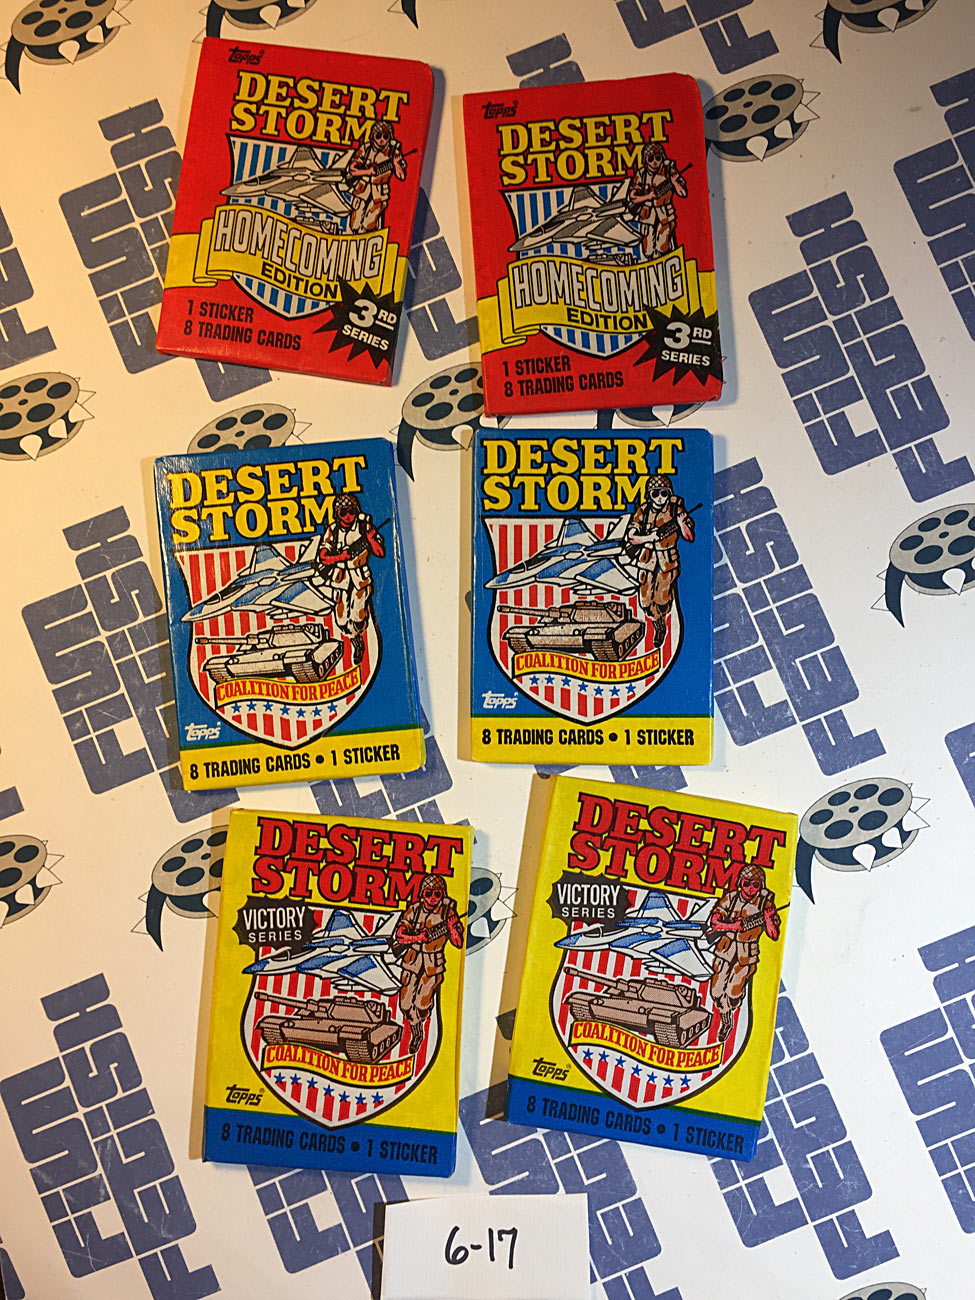 Set of 6 Sealed Topps Desert Storm Trading Card Wax Packs, Homecoming, Coalition For Peace, Victory Series [617]